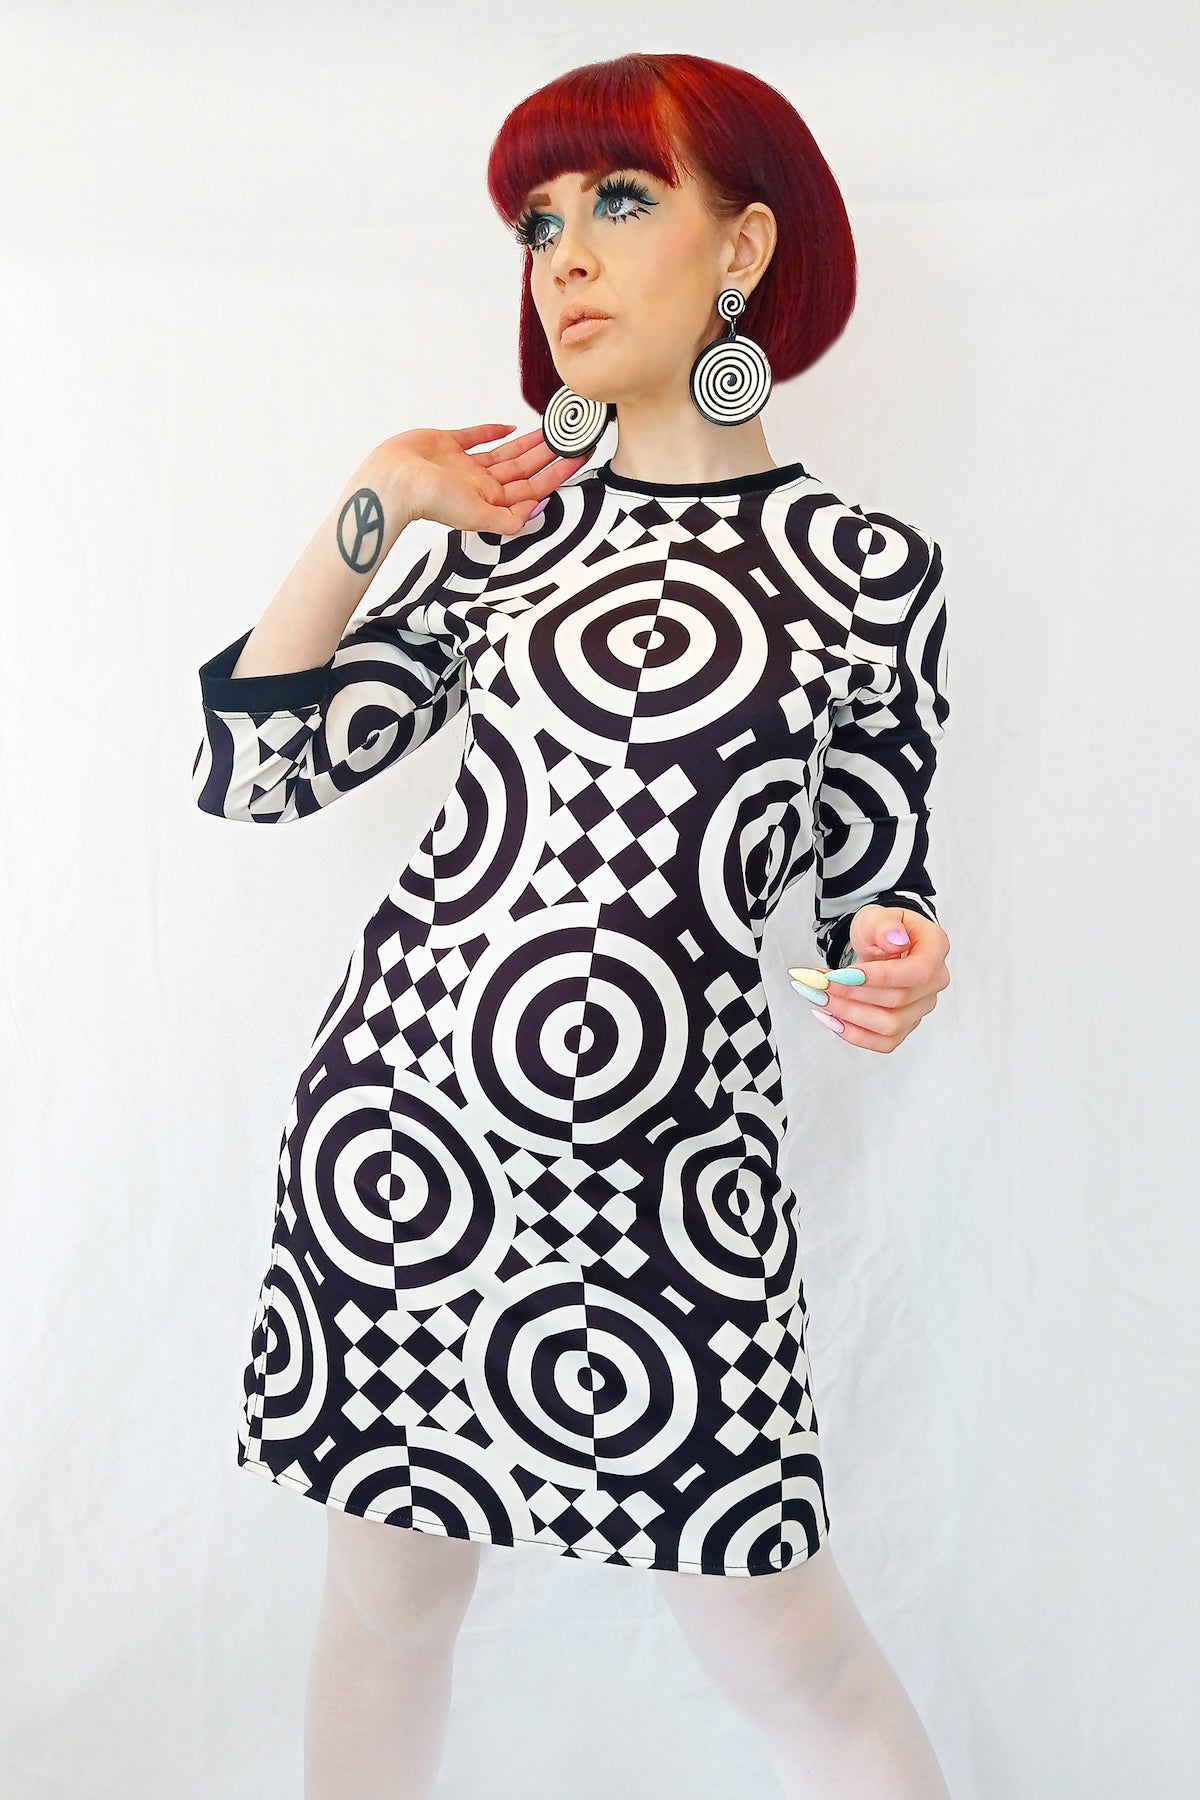 A model wearing a 3/4 sleeve mini dress with a black and white checkered and concentric circle op-art style pattern. It has a round neckline